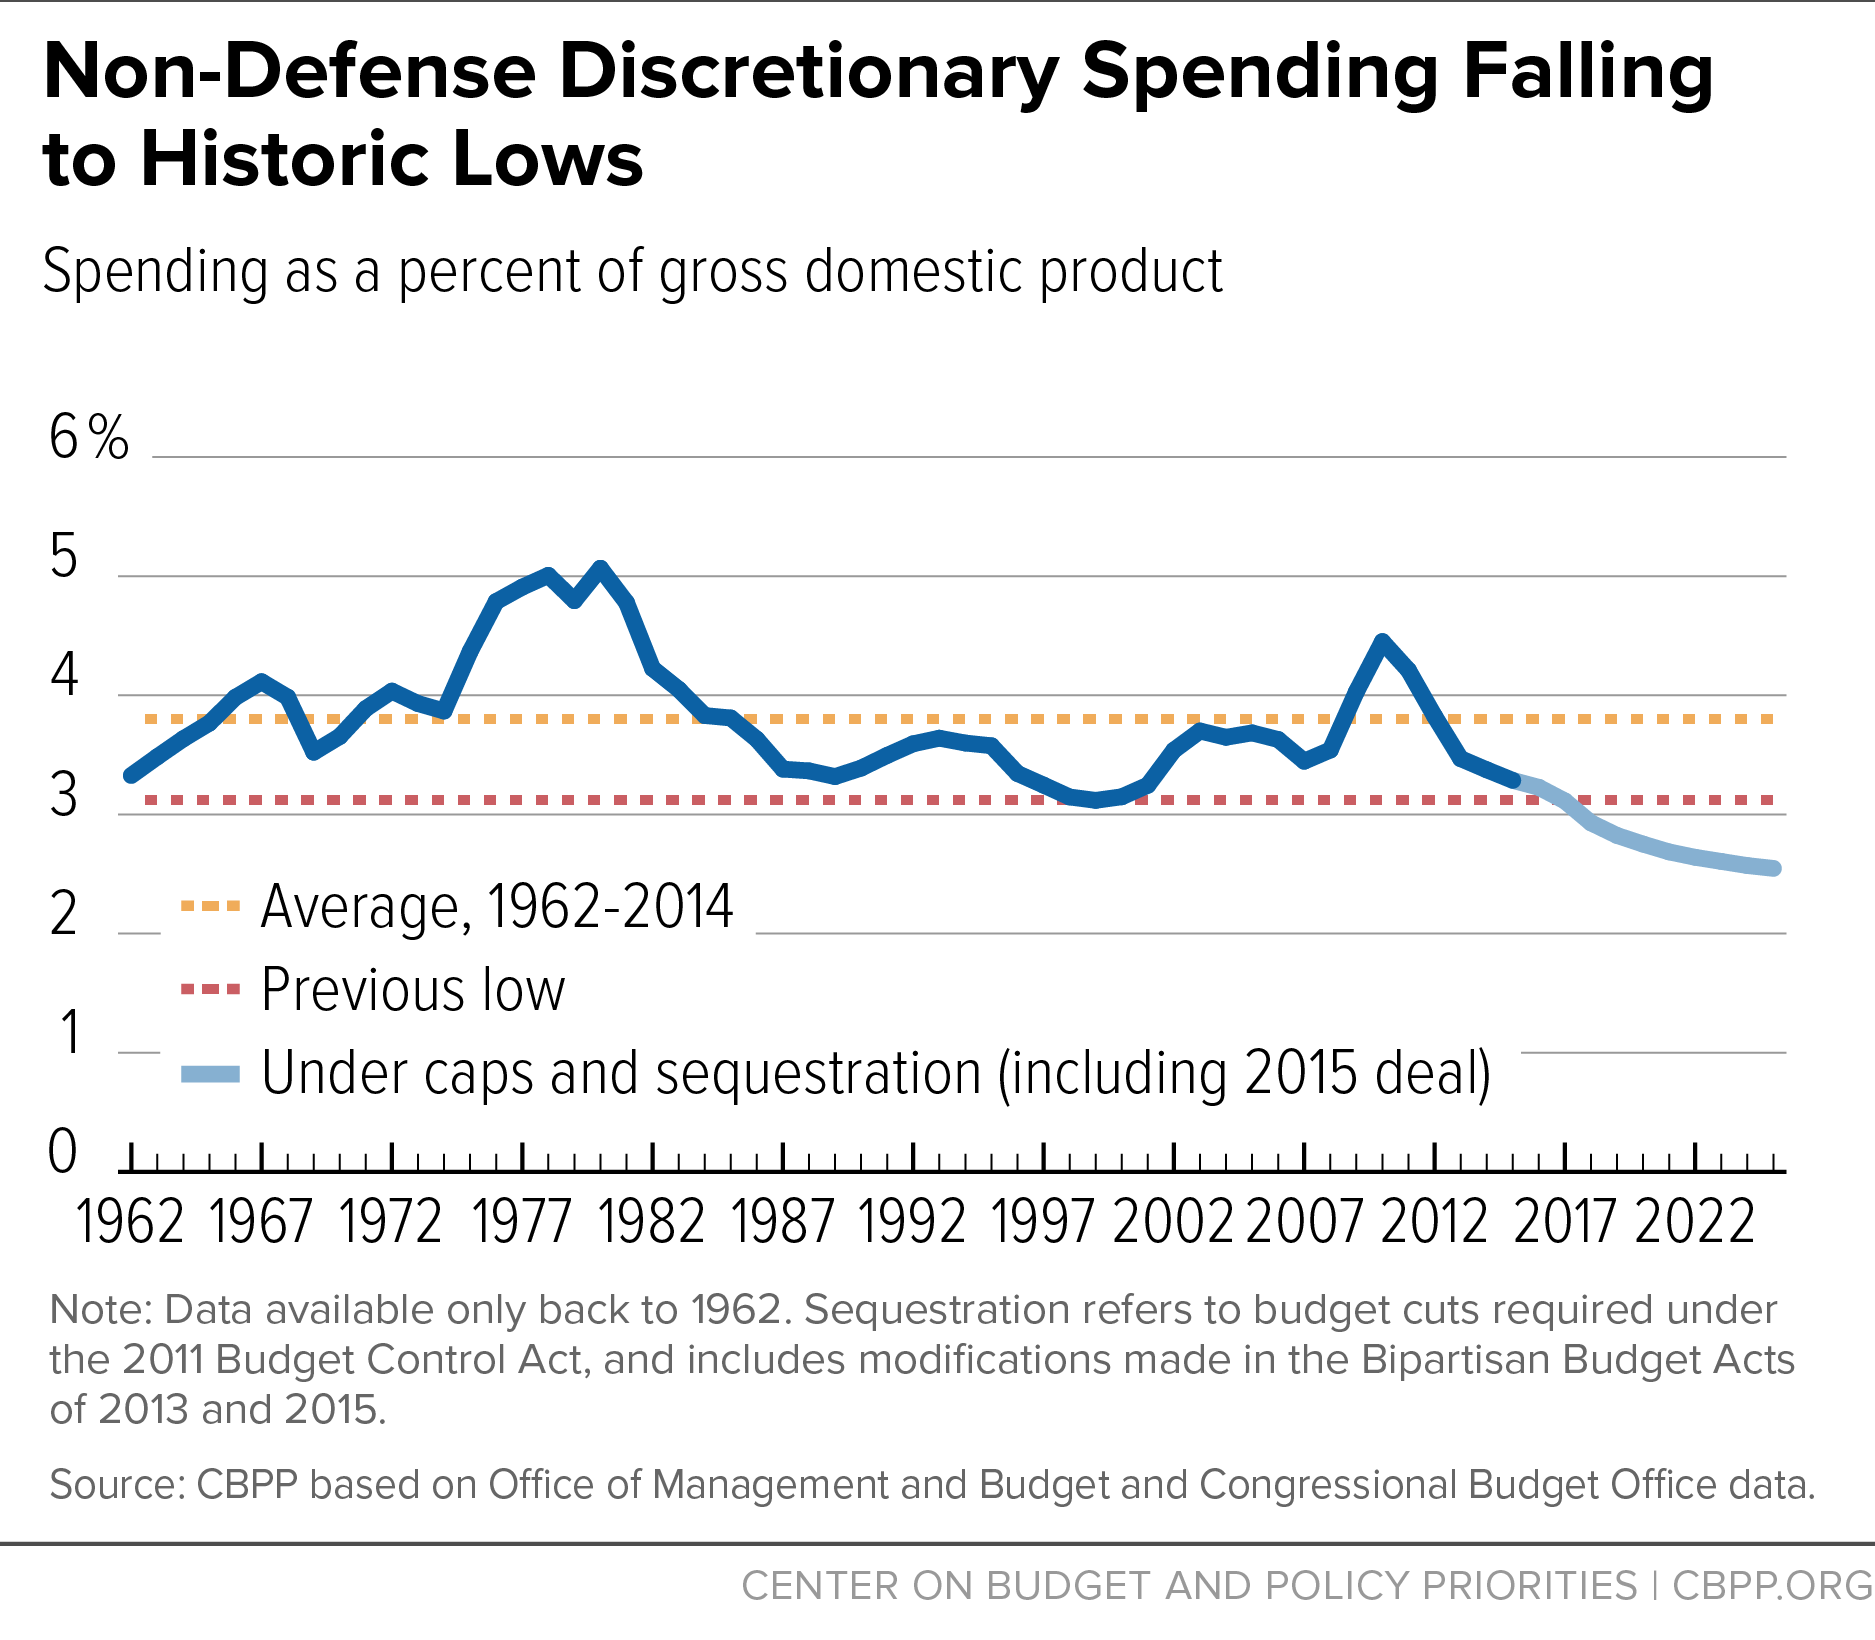 Non-Defense Discretionary Spending Falling to Historic Lows